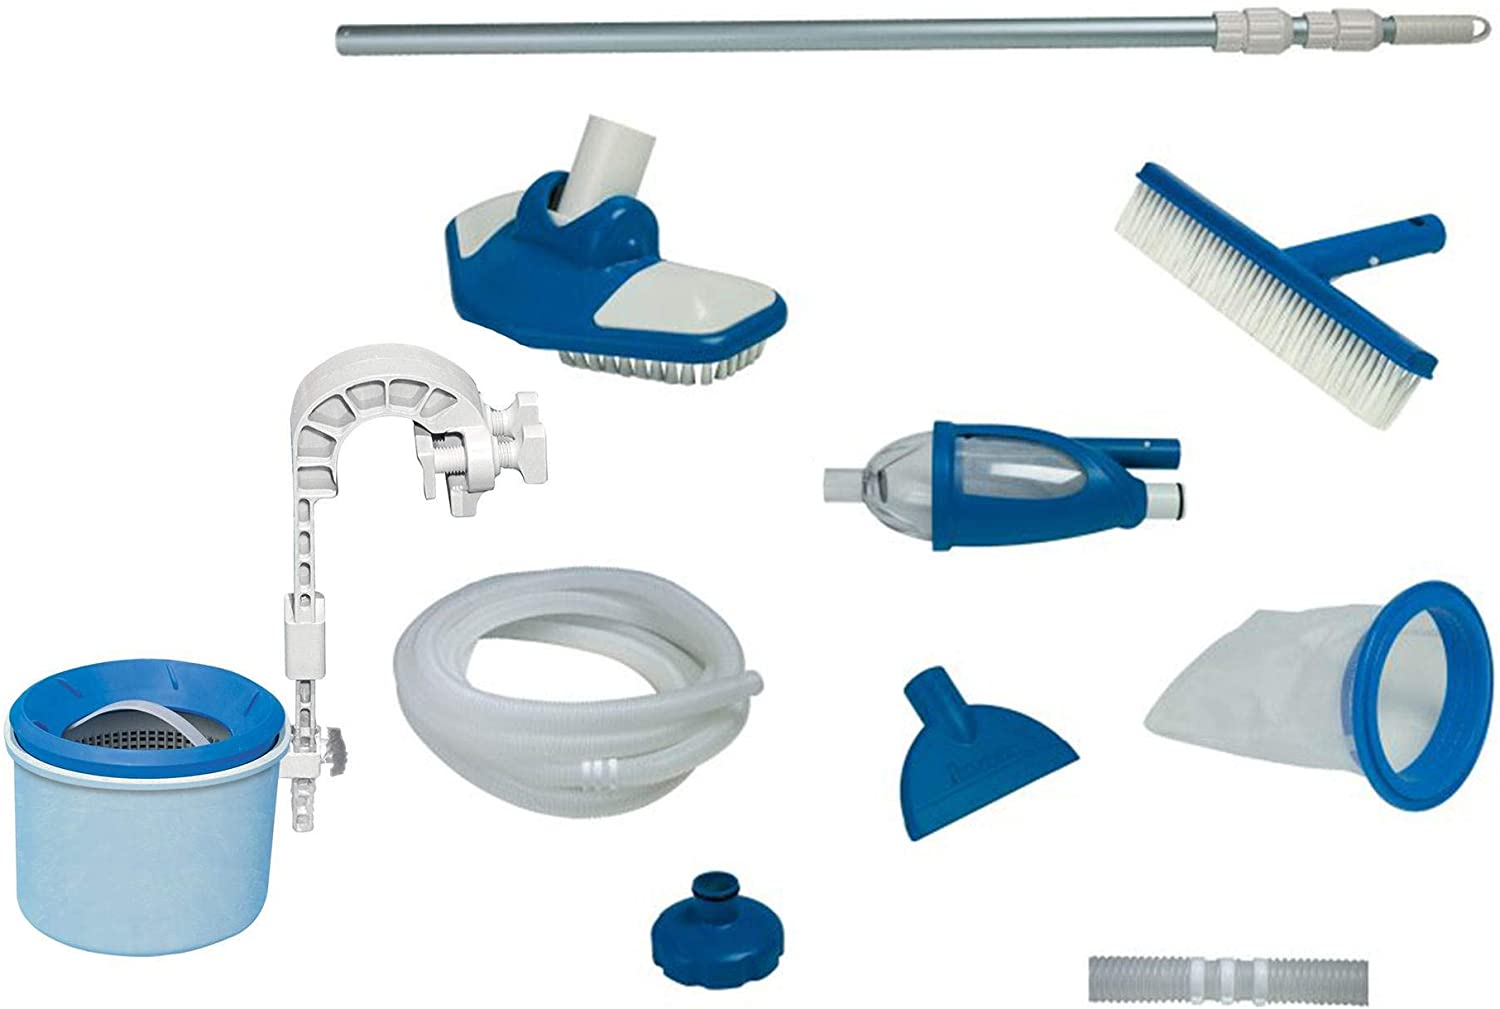 Intex 2-Piece Deluxe Cleaning Kit includes Surface Skimmer and Deluxe Maintenance Kit